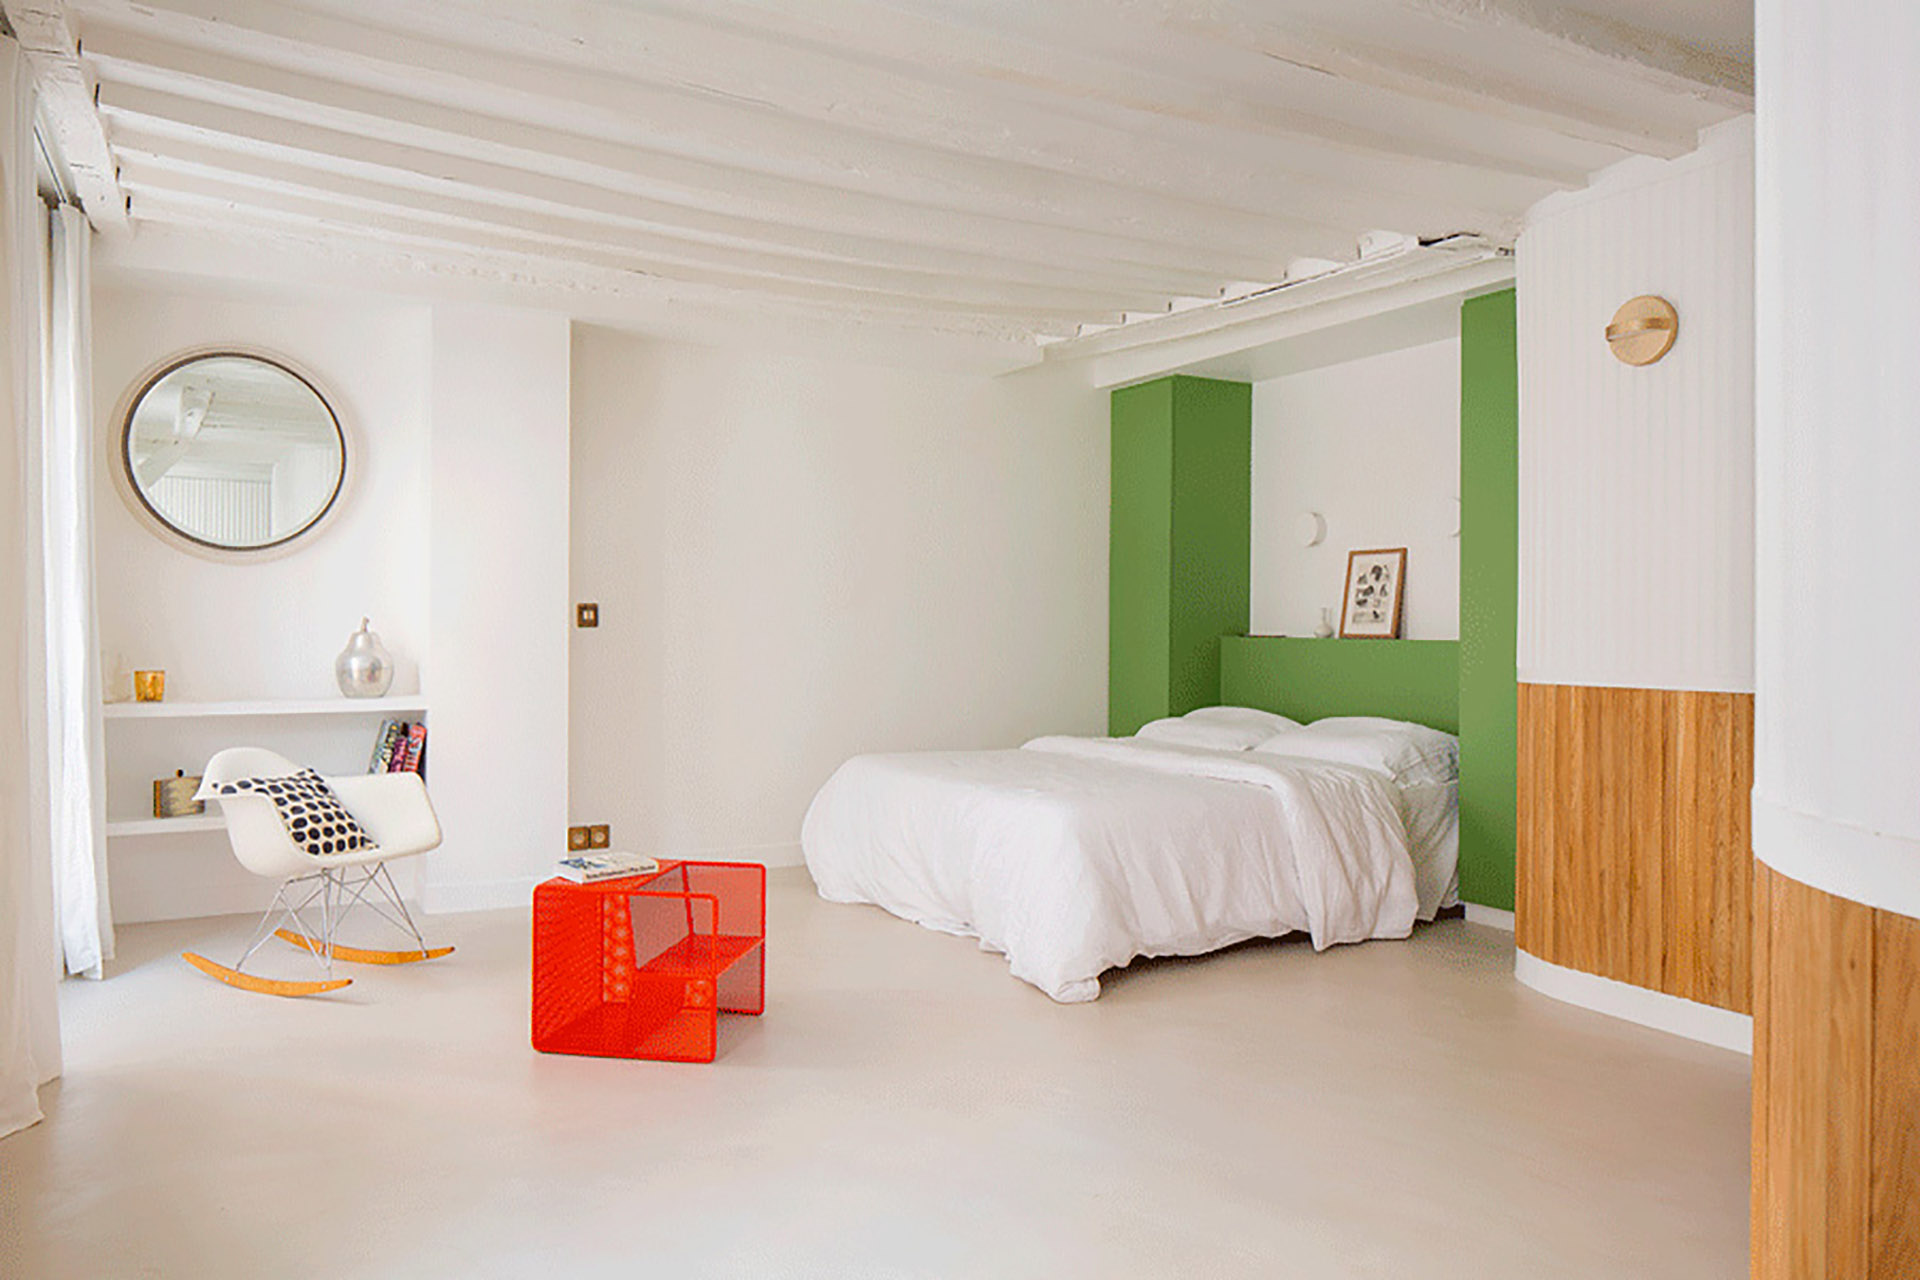 The renovation of a pied-à-terre in Paris adds light and functionality to an old building